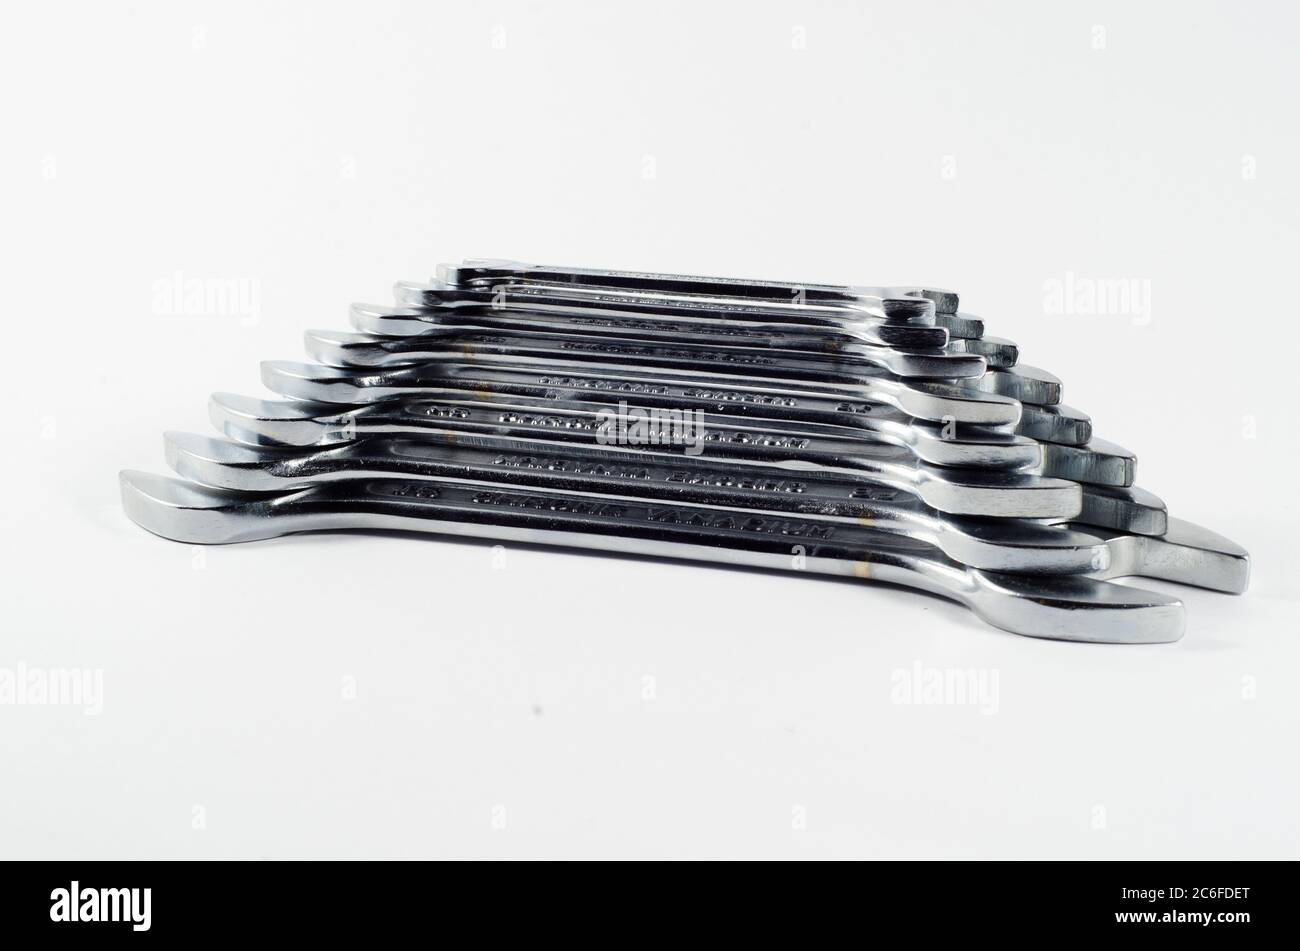 Set of Wrenches for professional or home purpose Stock Photo